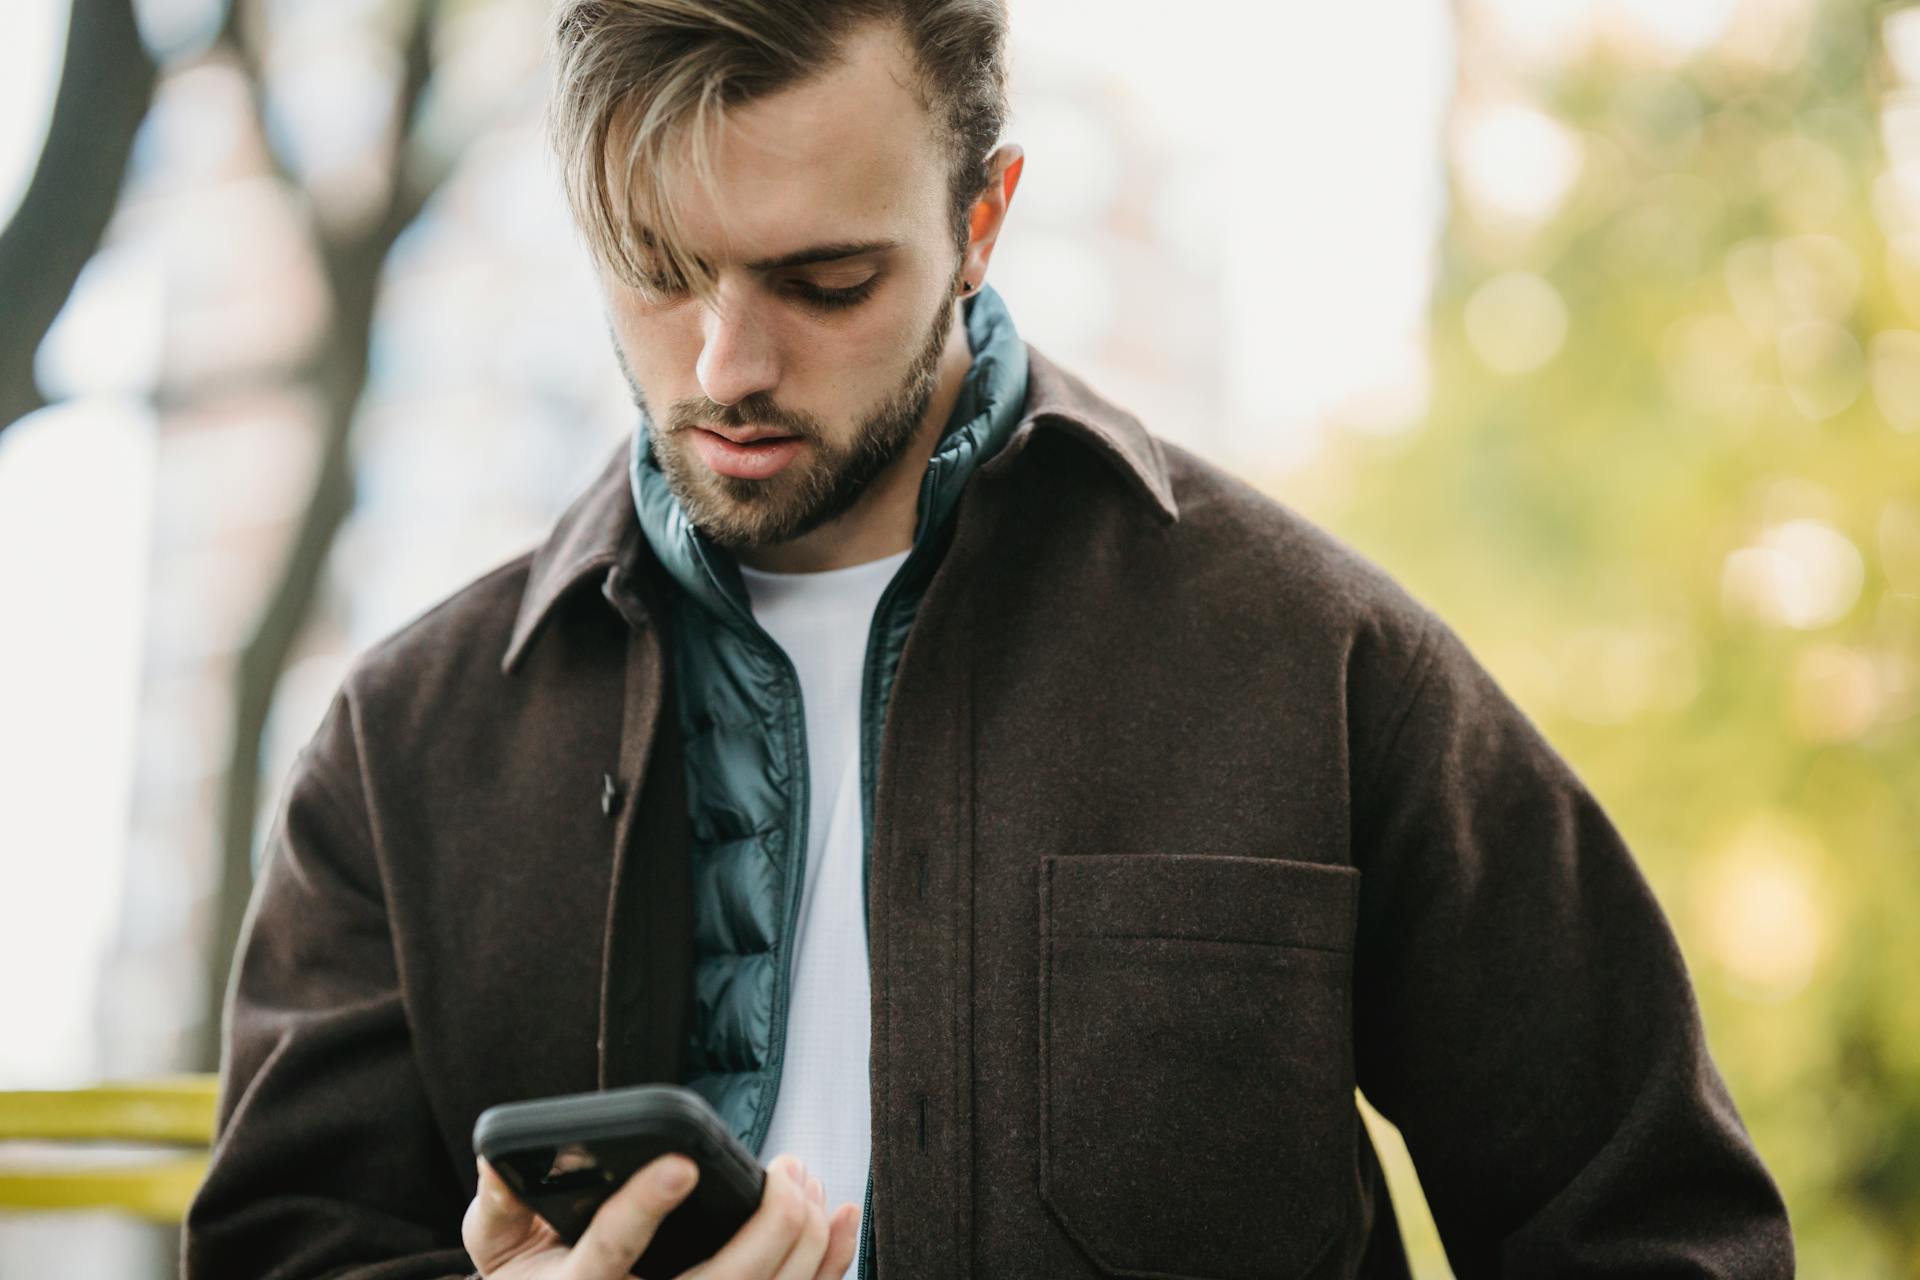 A man using his cell phone | Source: Pexels